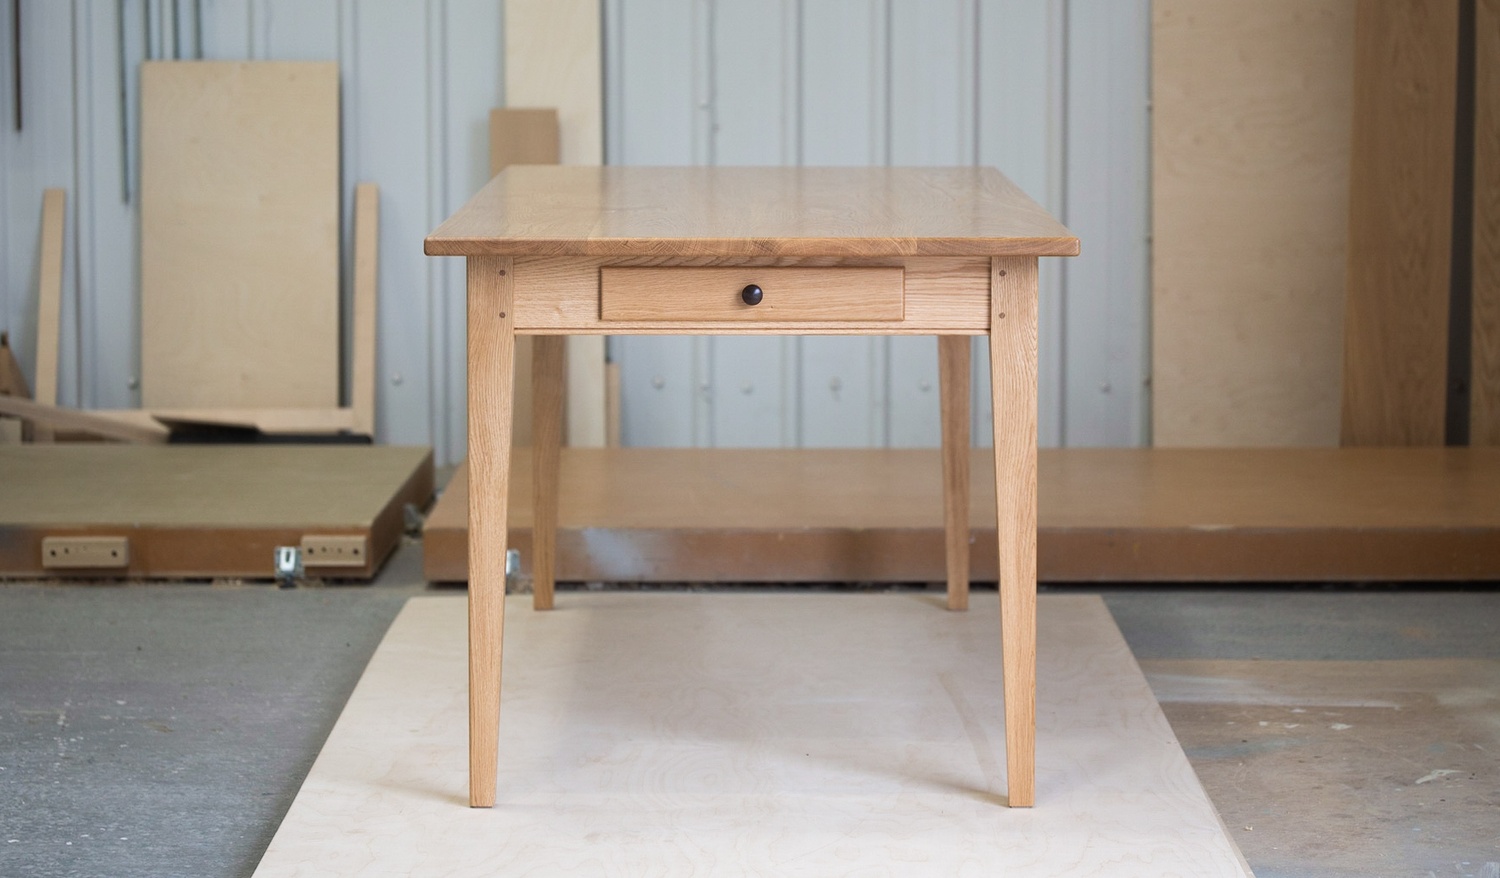 oak kitchen / dining table, shaker style, tapered legs, dovetailed end-rail draw, doweled mortise and tenon joinery